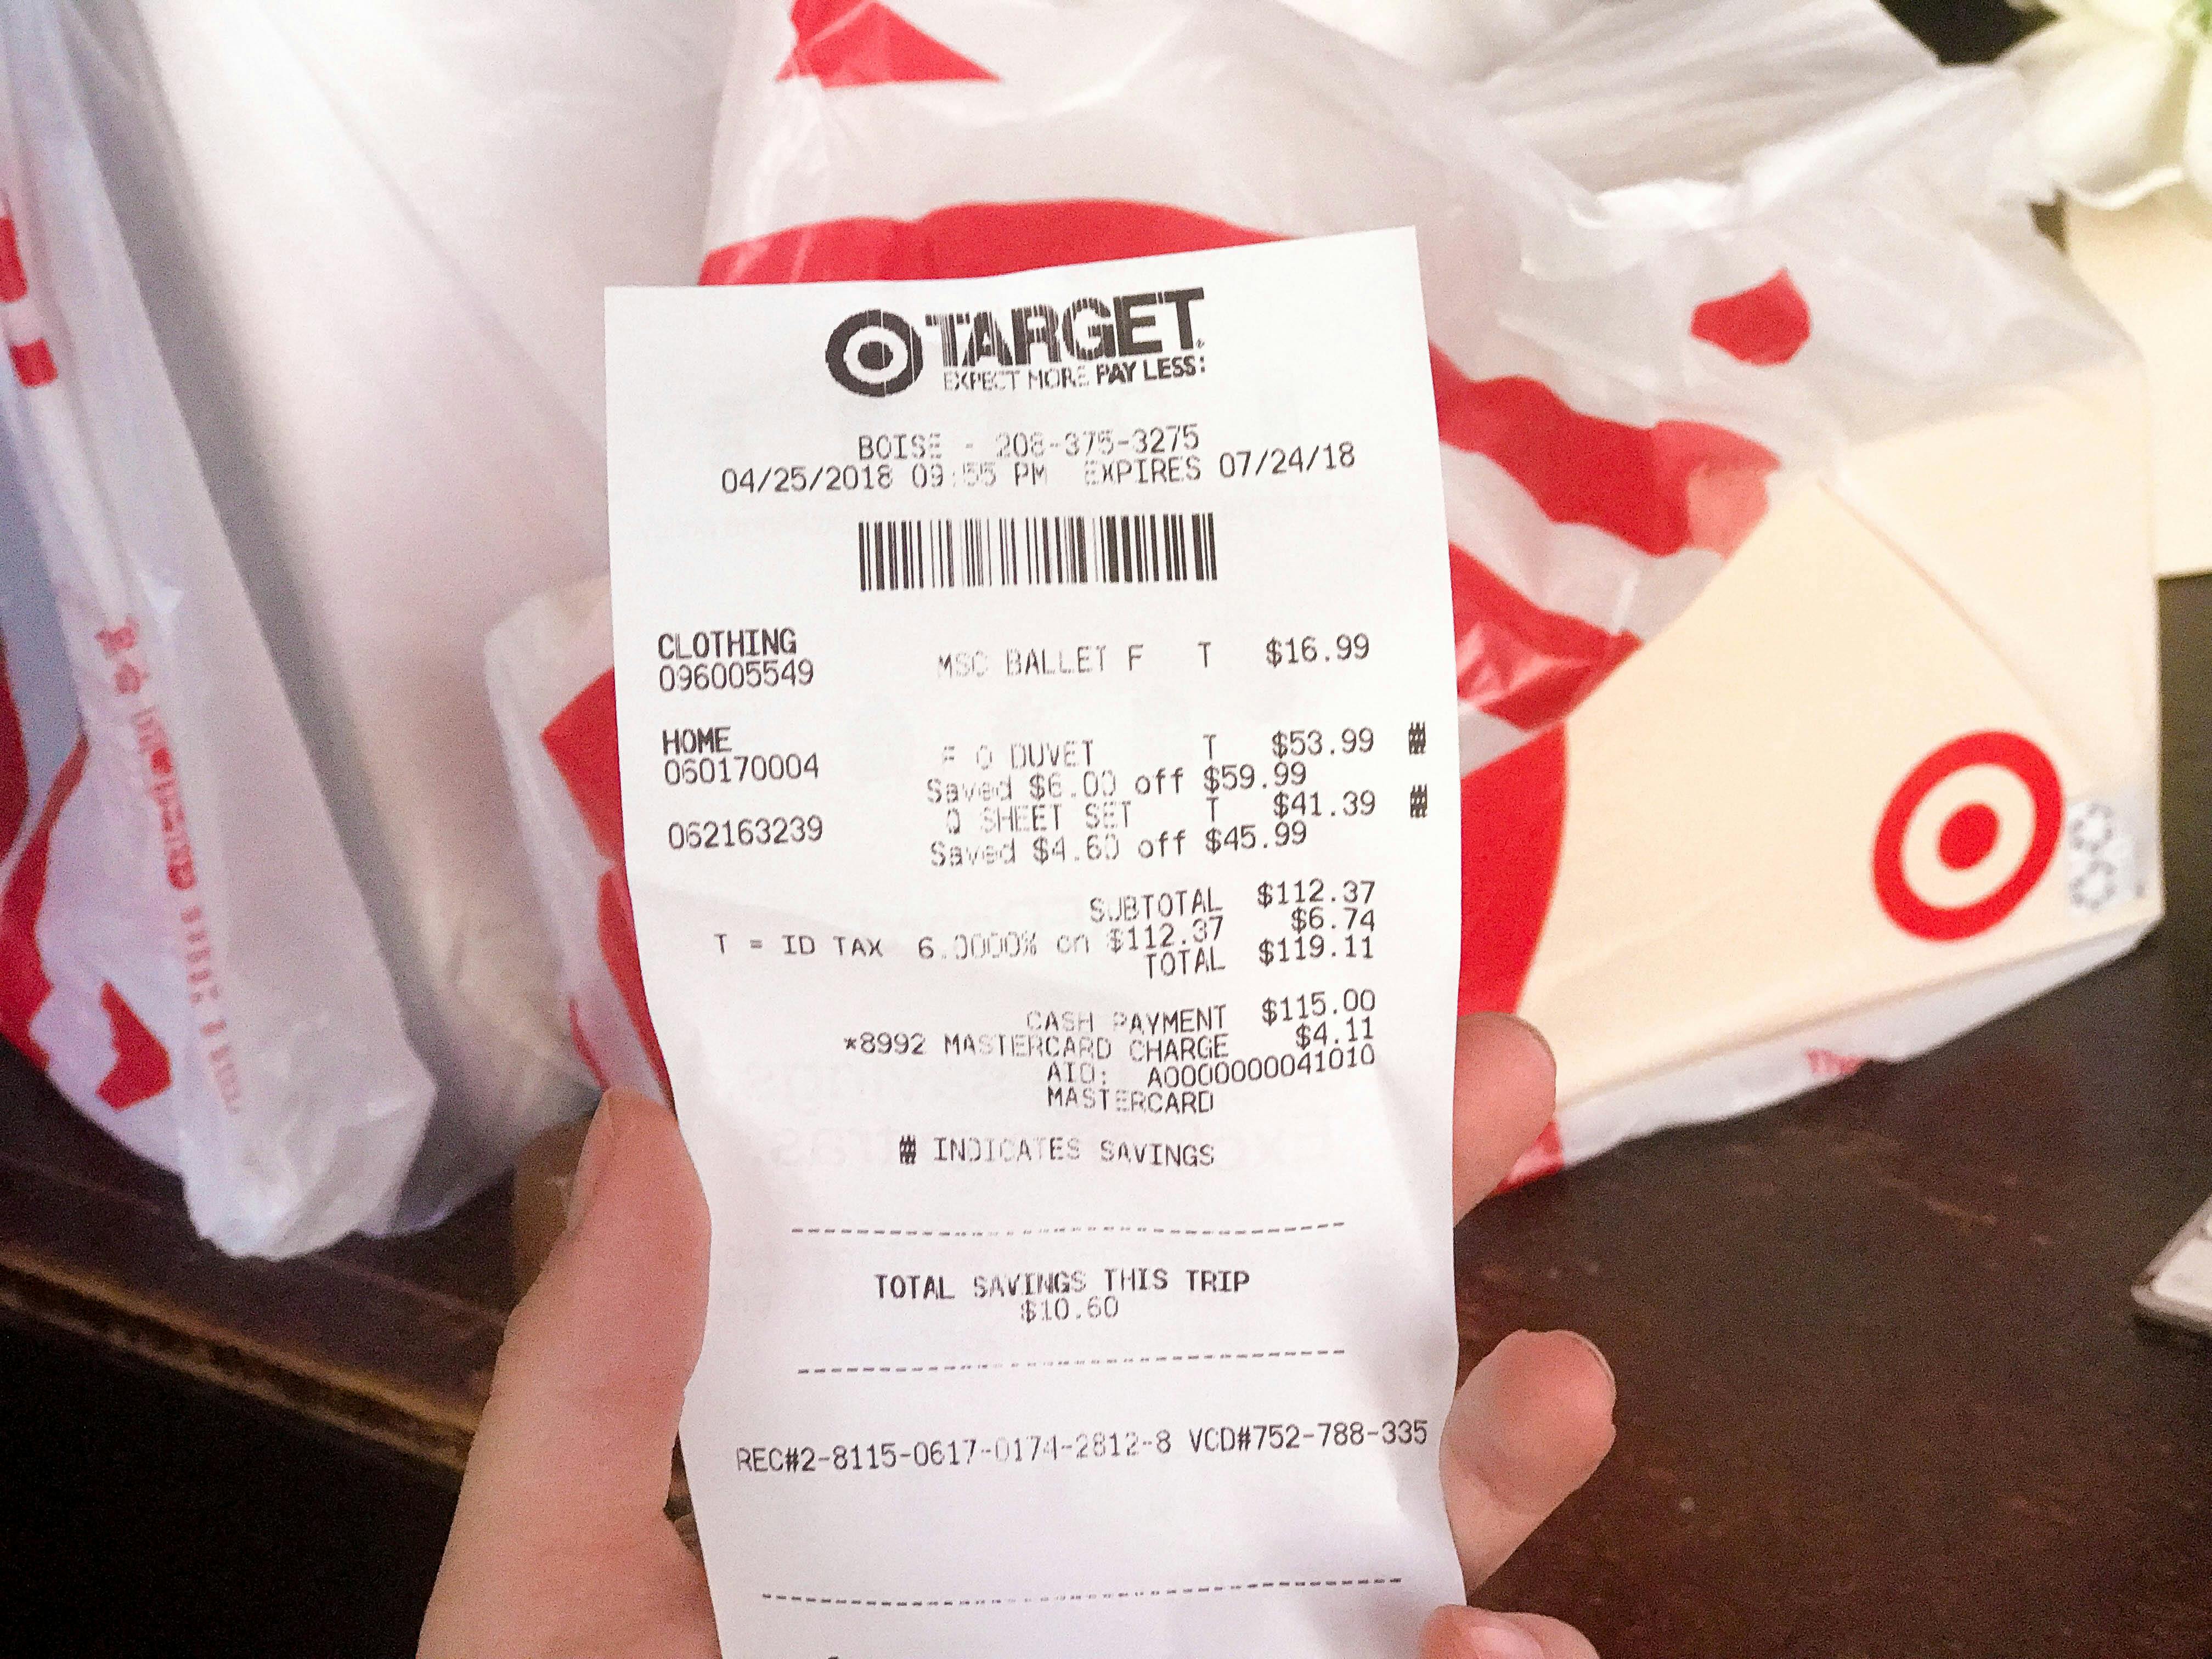 8 Best Ways to Get Free Target Gift Cards - The Krazy Coupon Lady